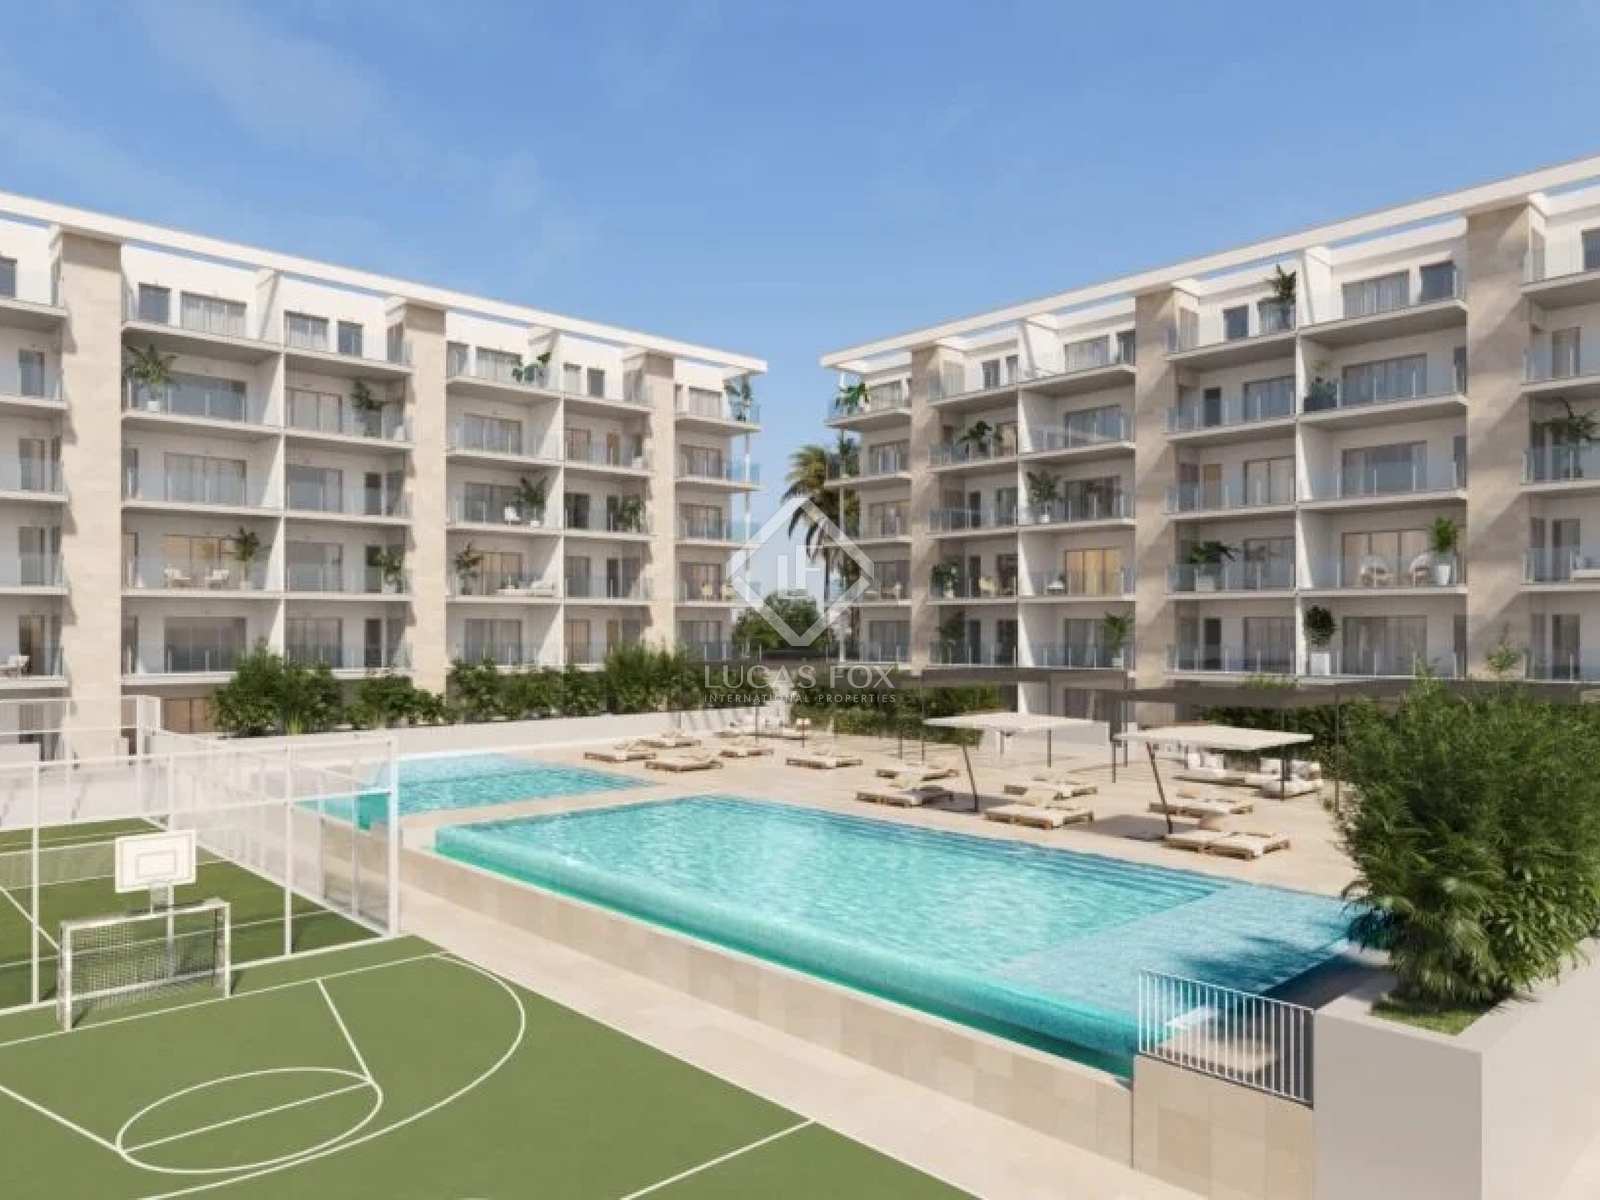 Canet-Residencial-II New development